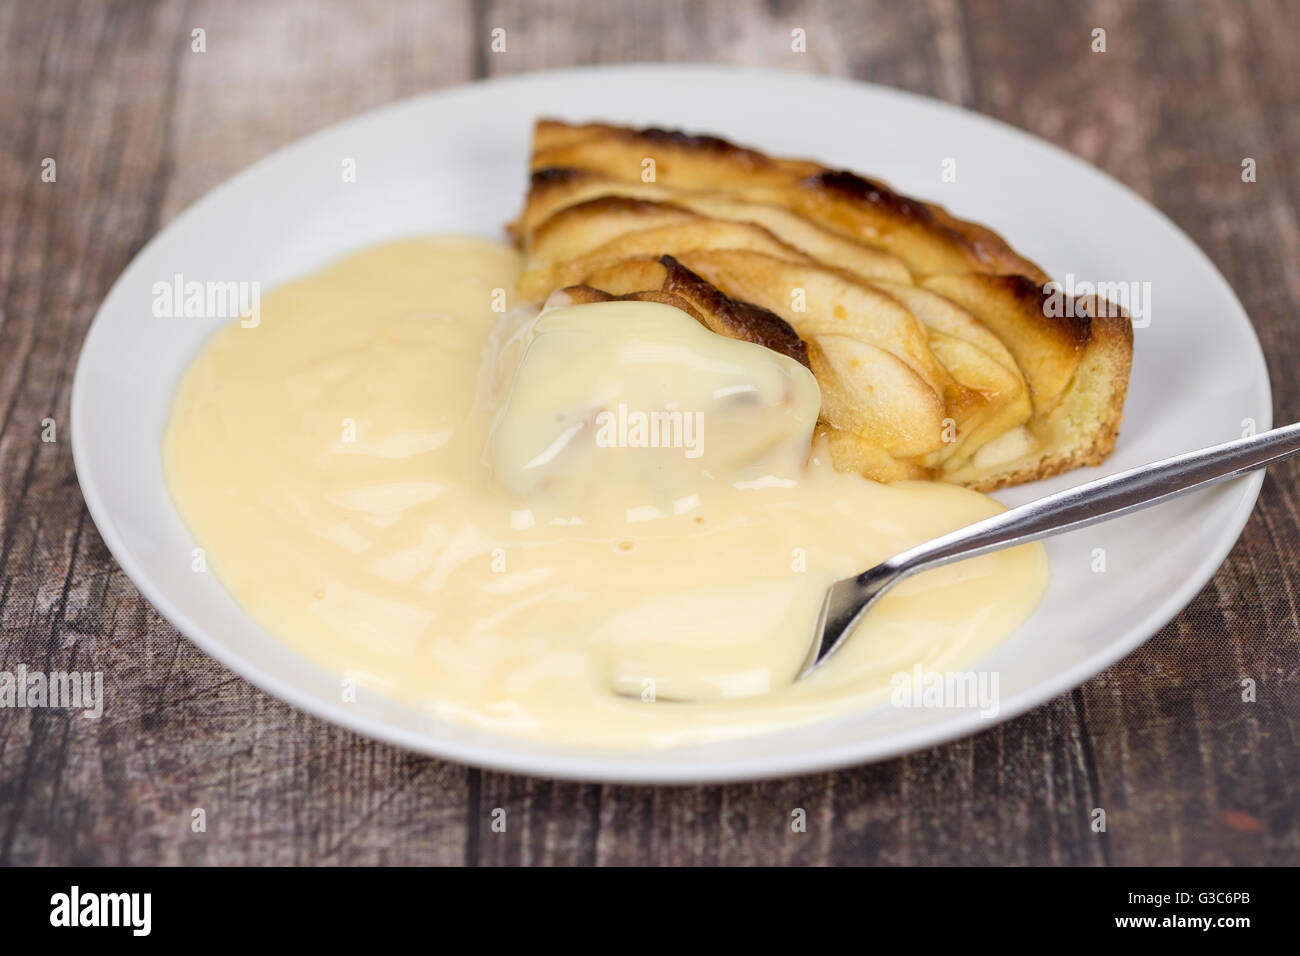 A slice of apple pie and custard with a spoon Stock Photo